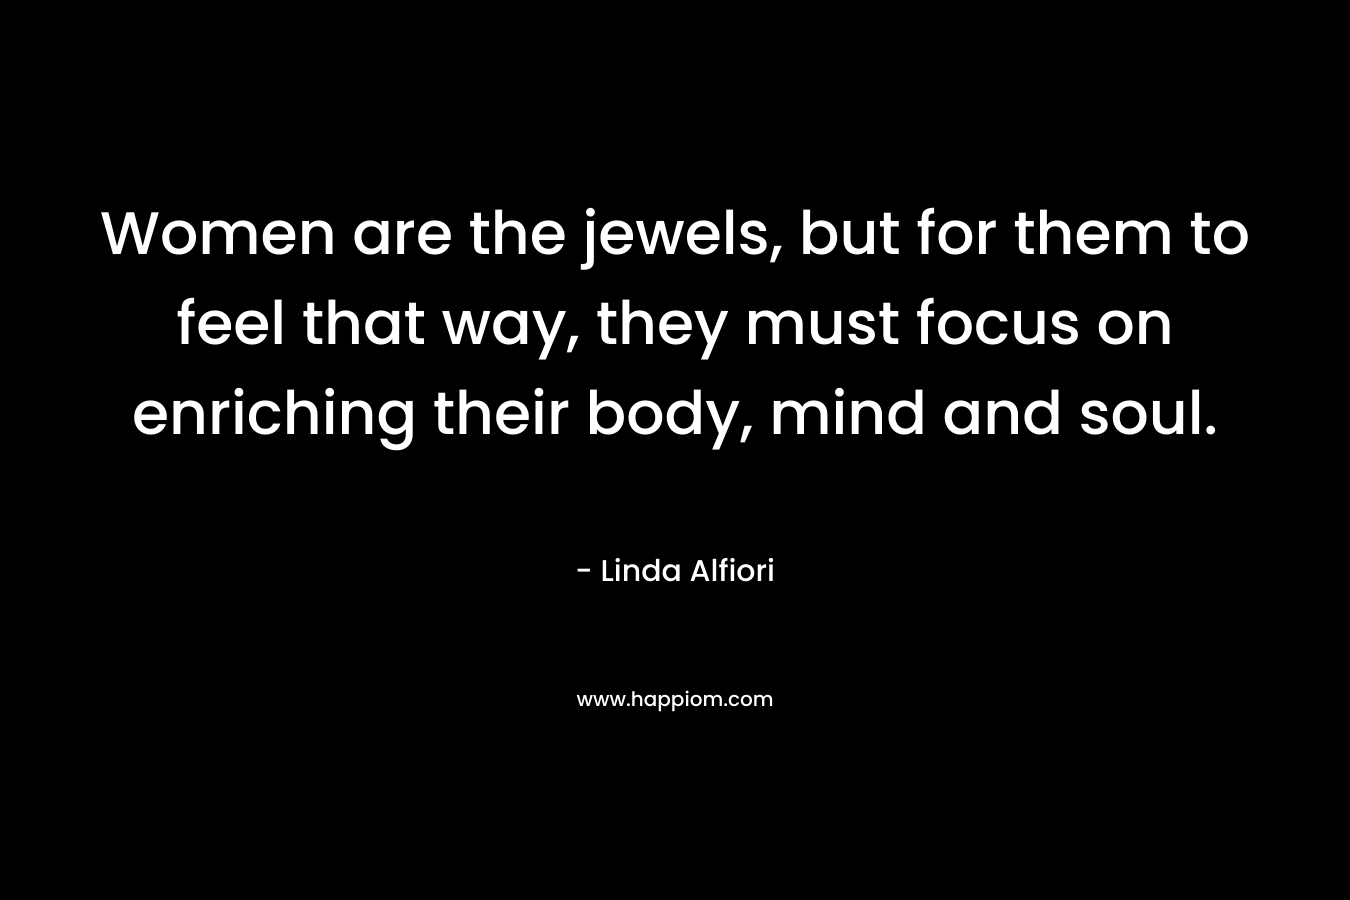 Women are the jewels, but for them to feel that way, they must focus on enriching their body, mind and soul. – Linda Alfiori